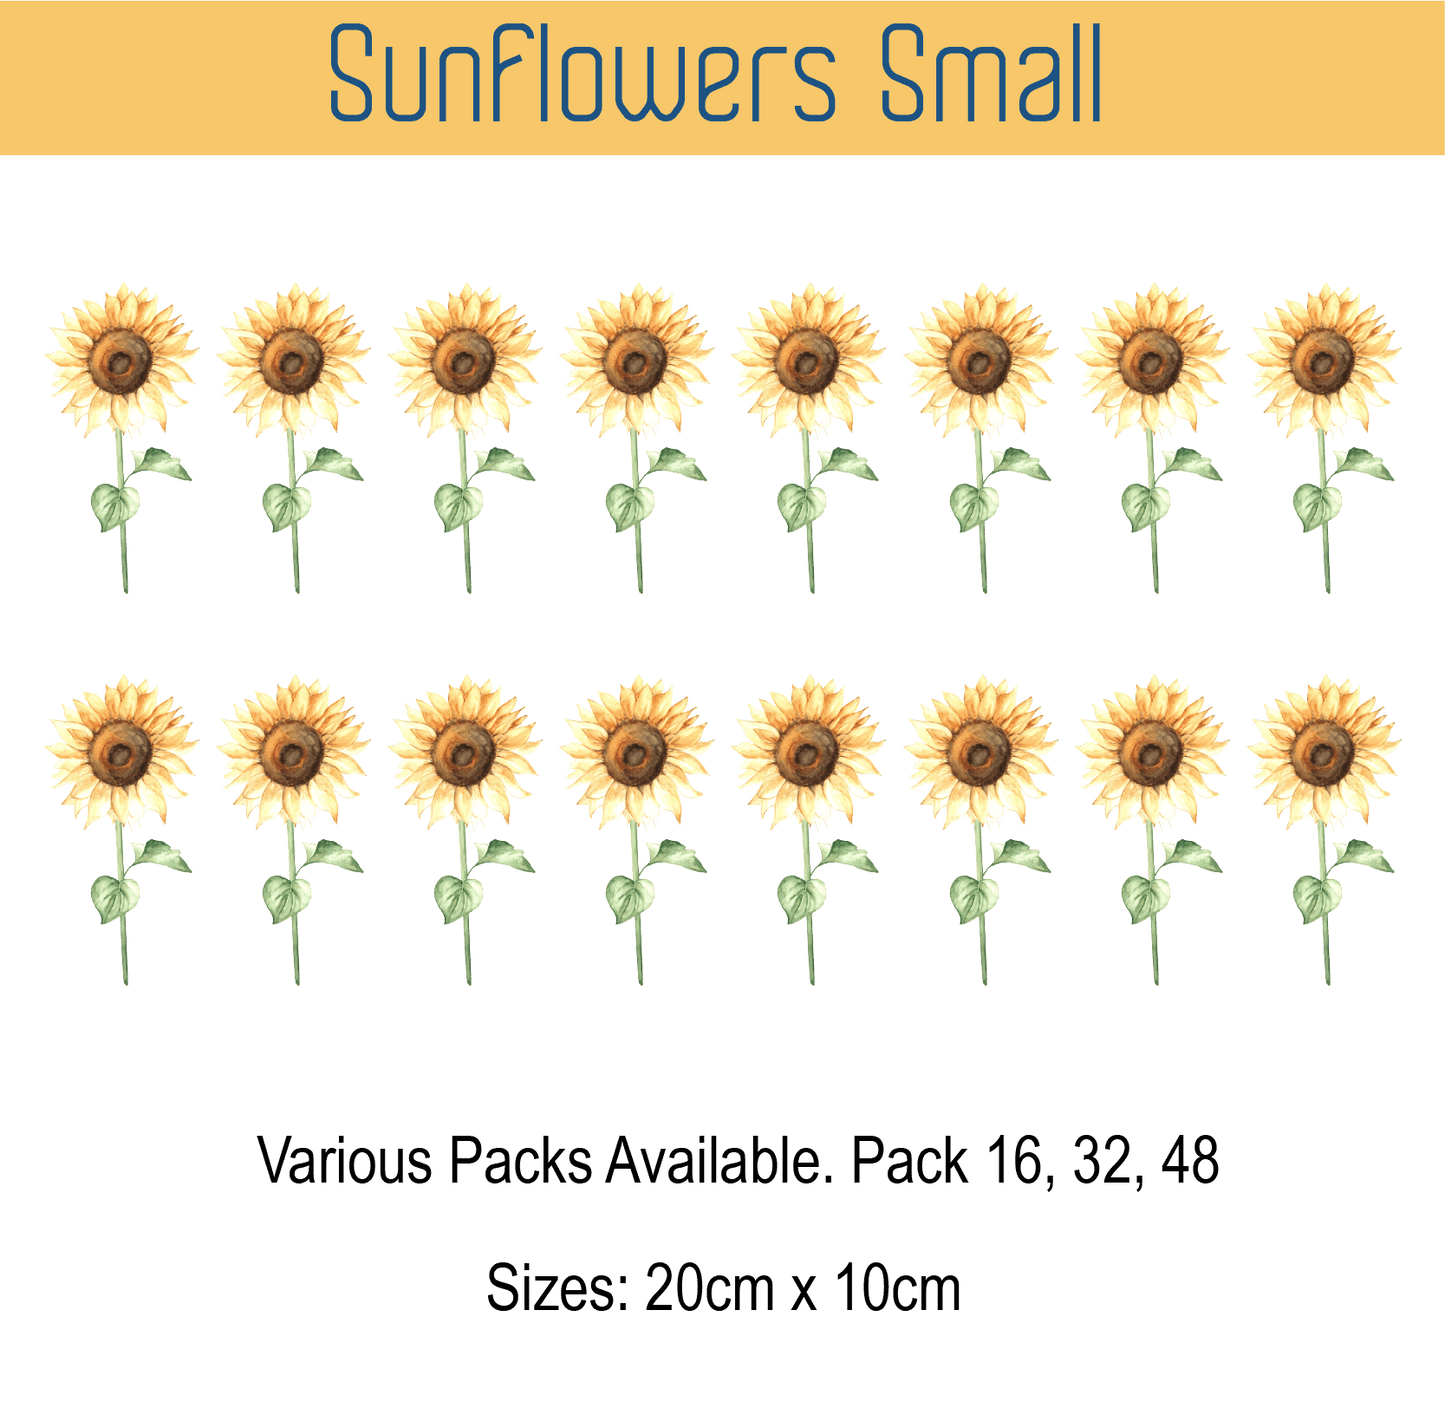 Sunflowers Small Wall Sticker Decals are arranged on a black background using damage-free, removable fabric.